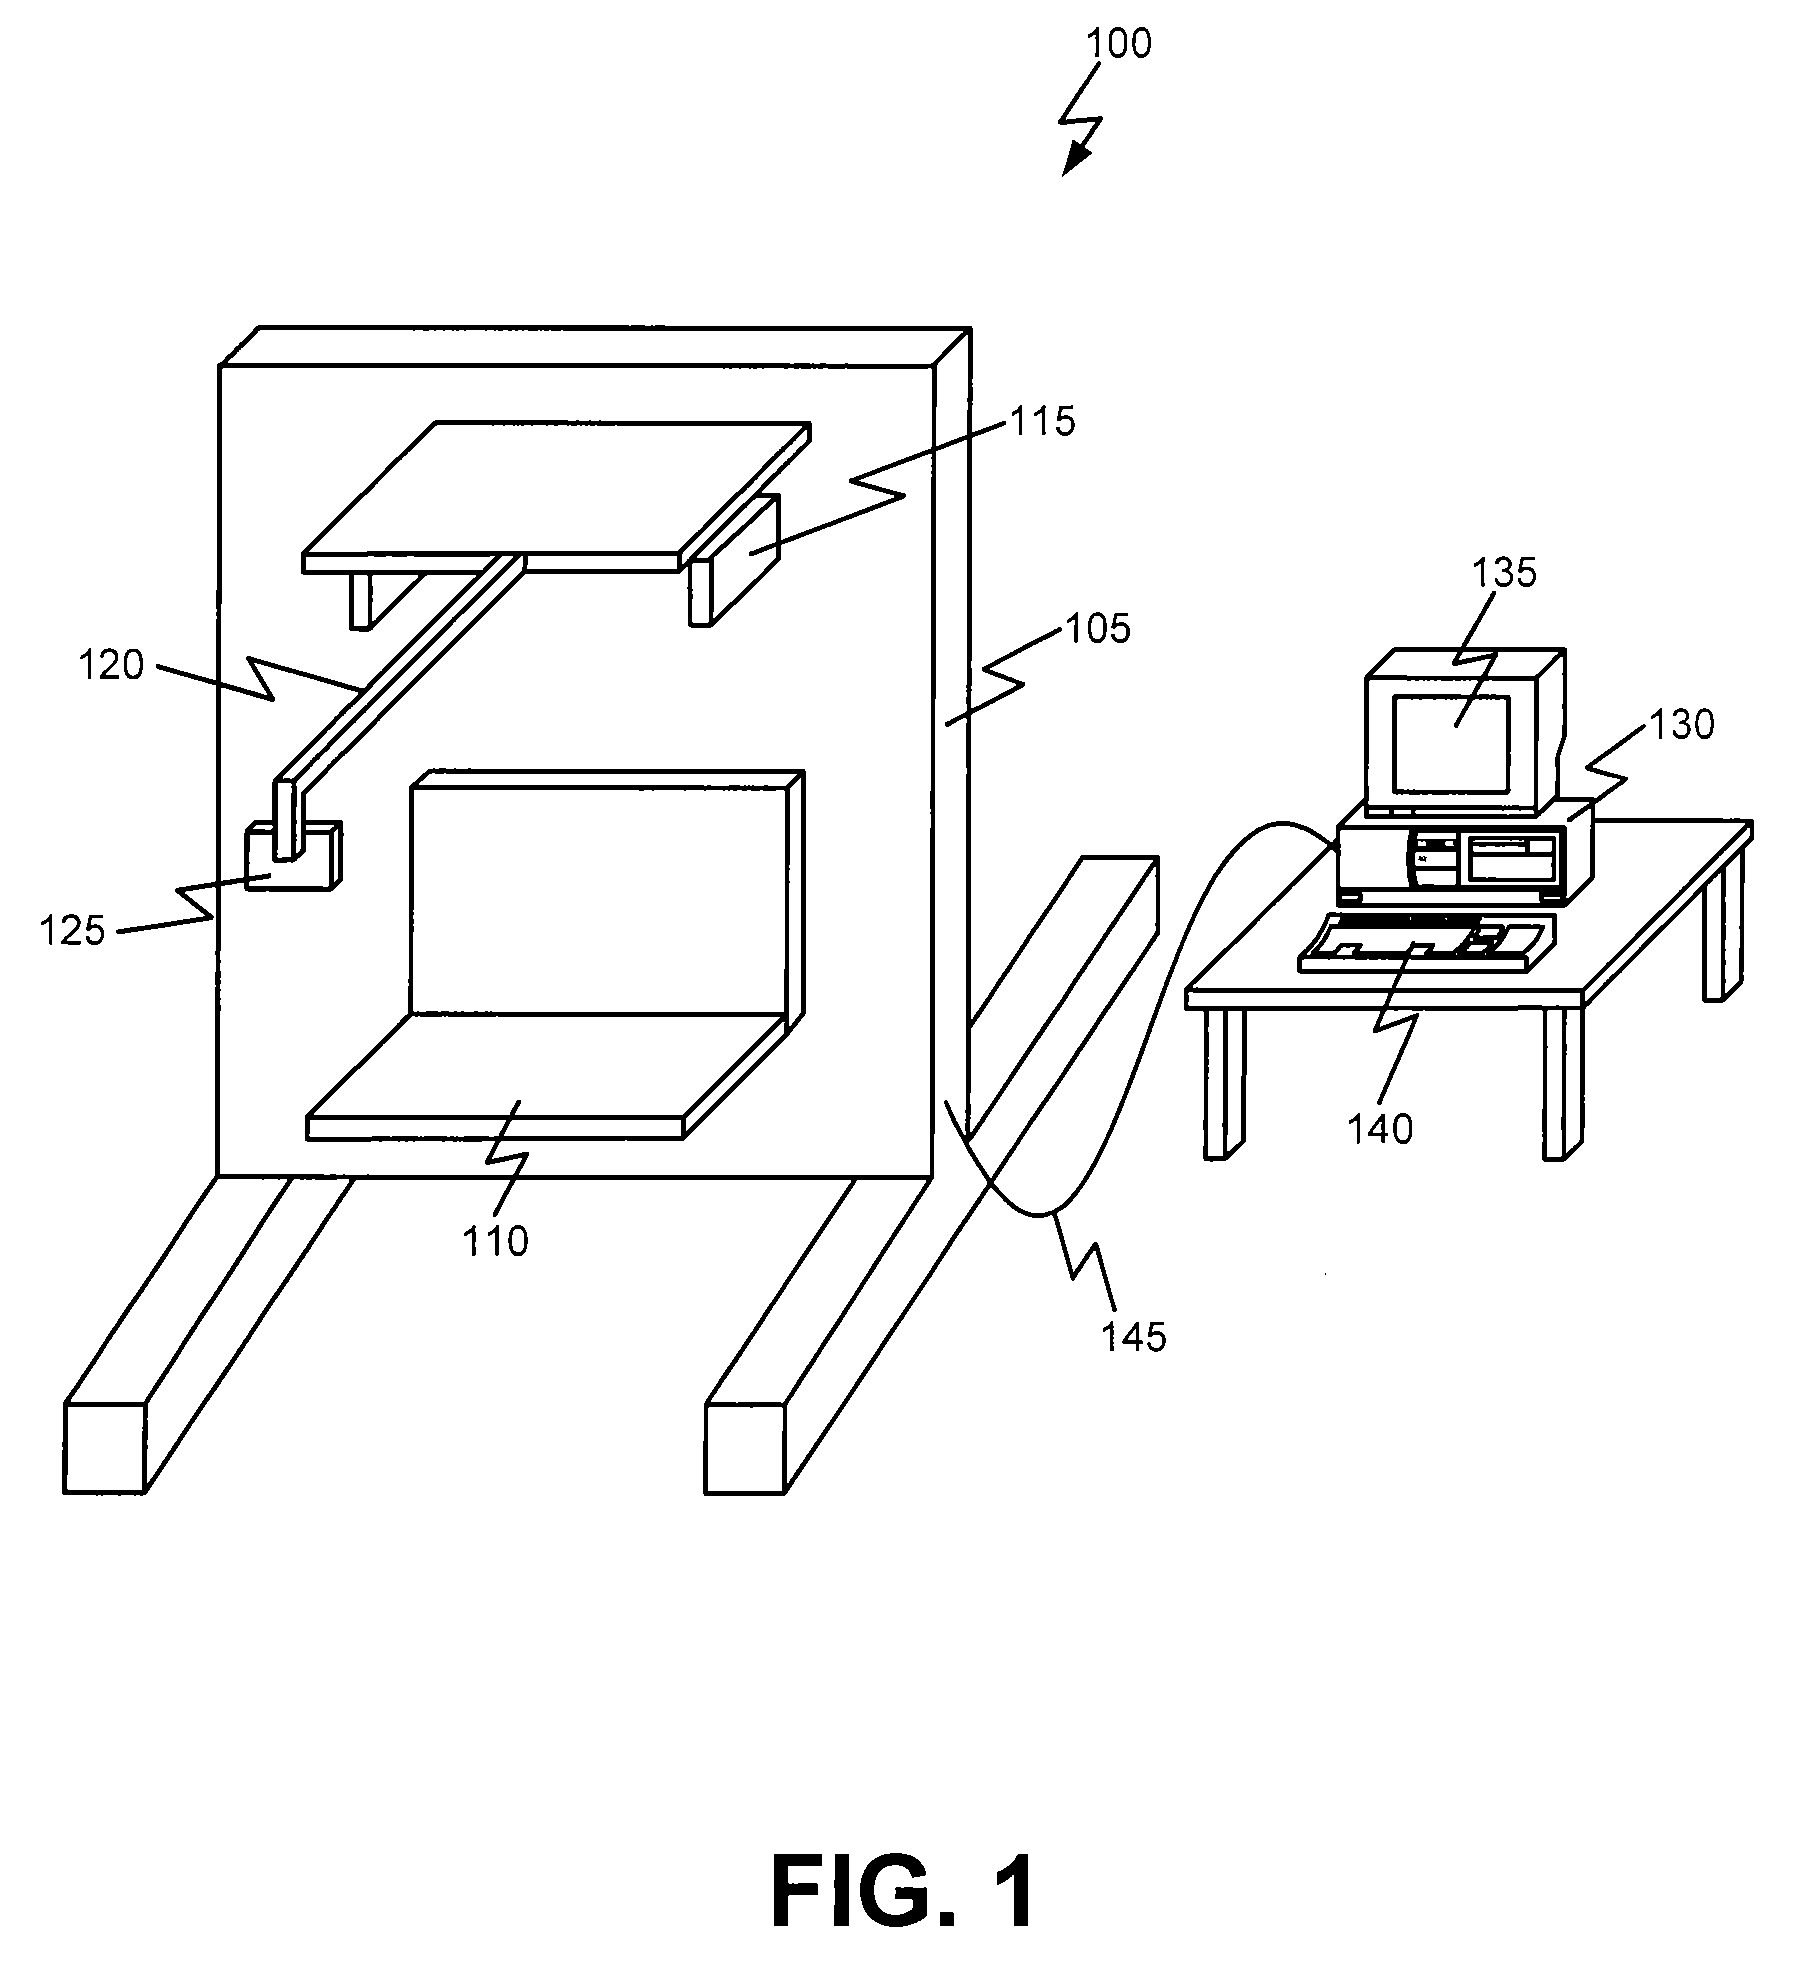 Apparatus for generating volumetric image and matching color textured external surface